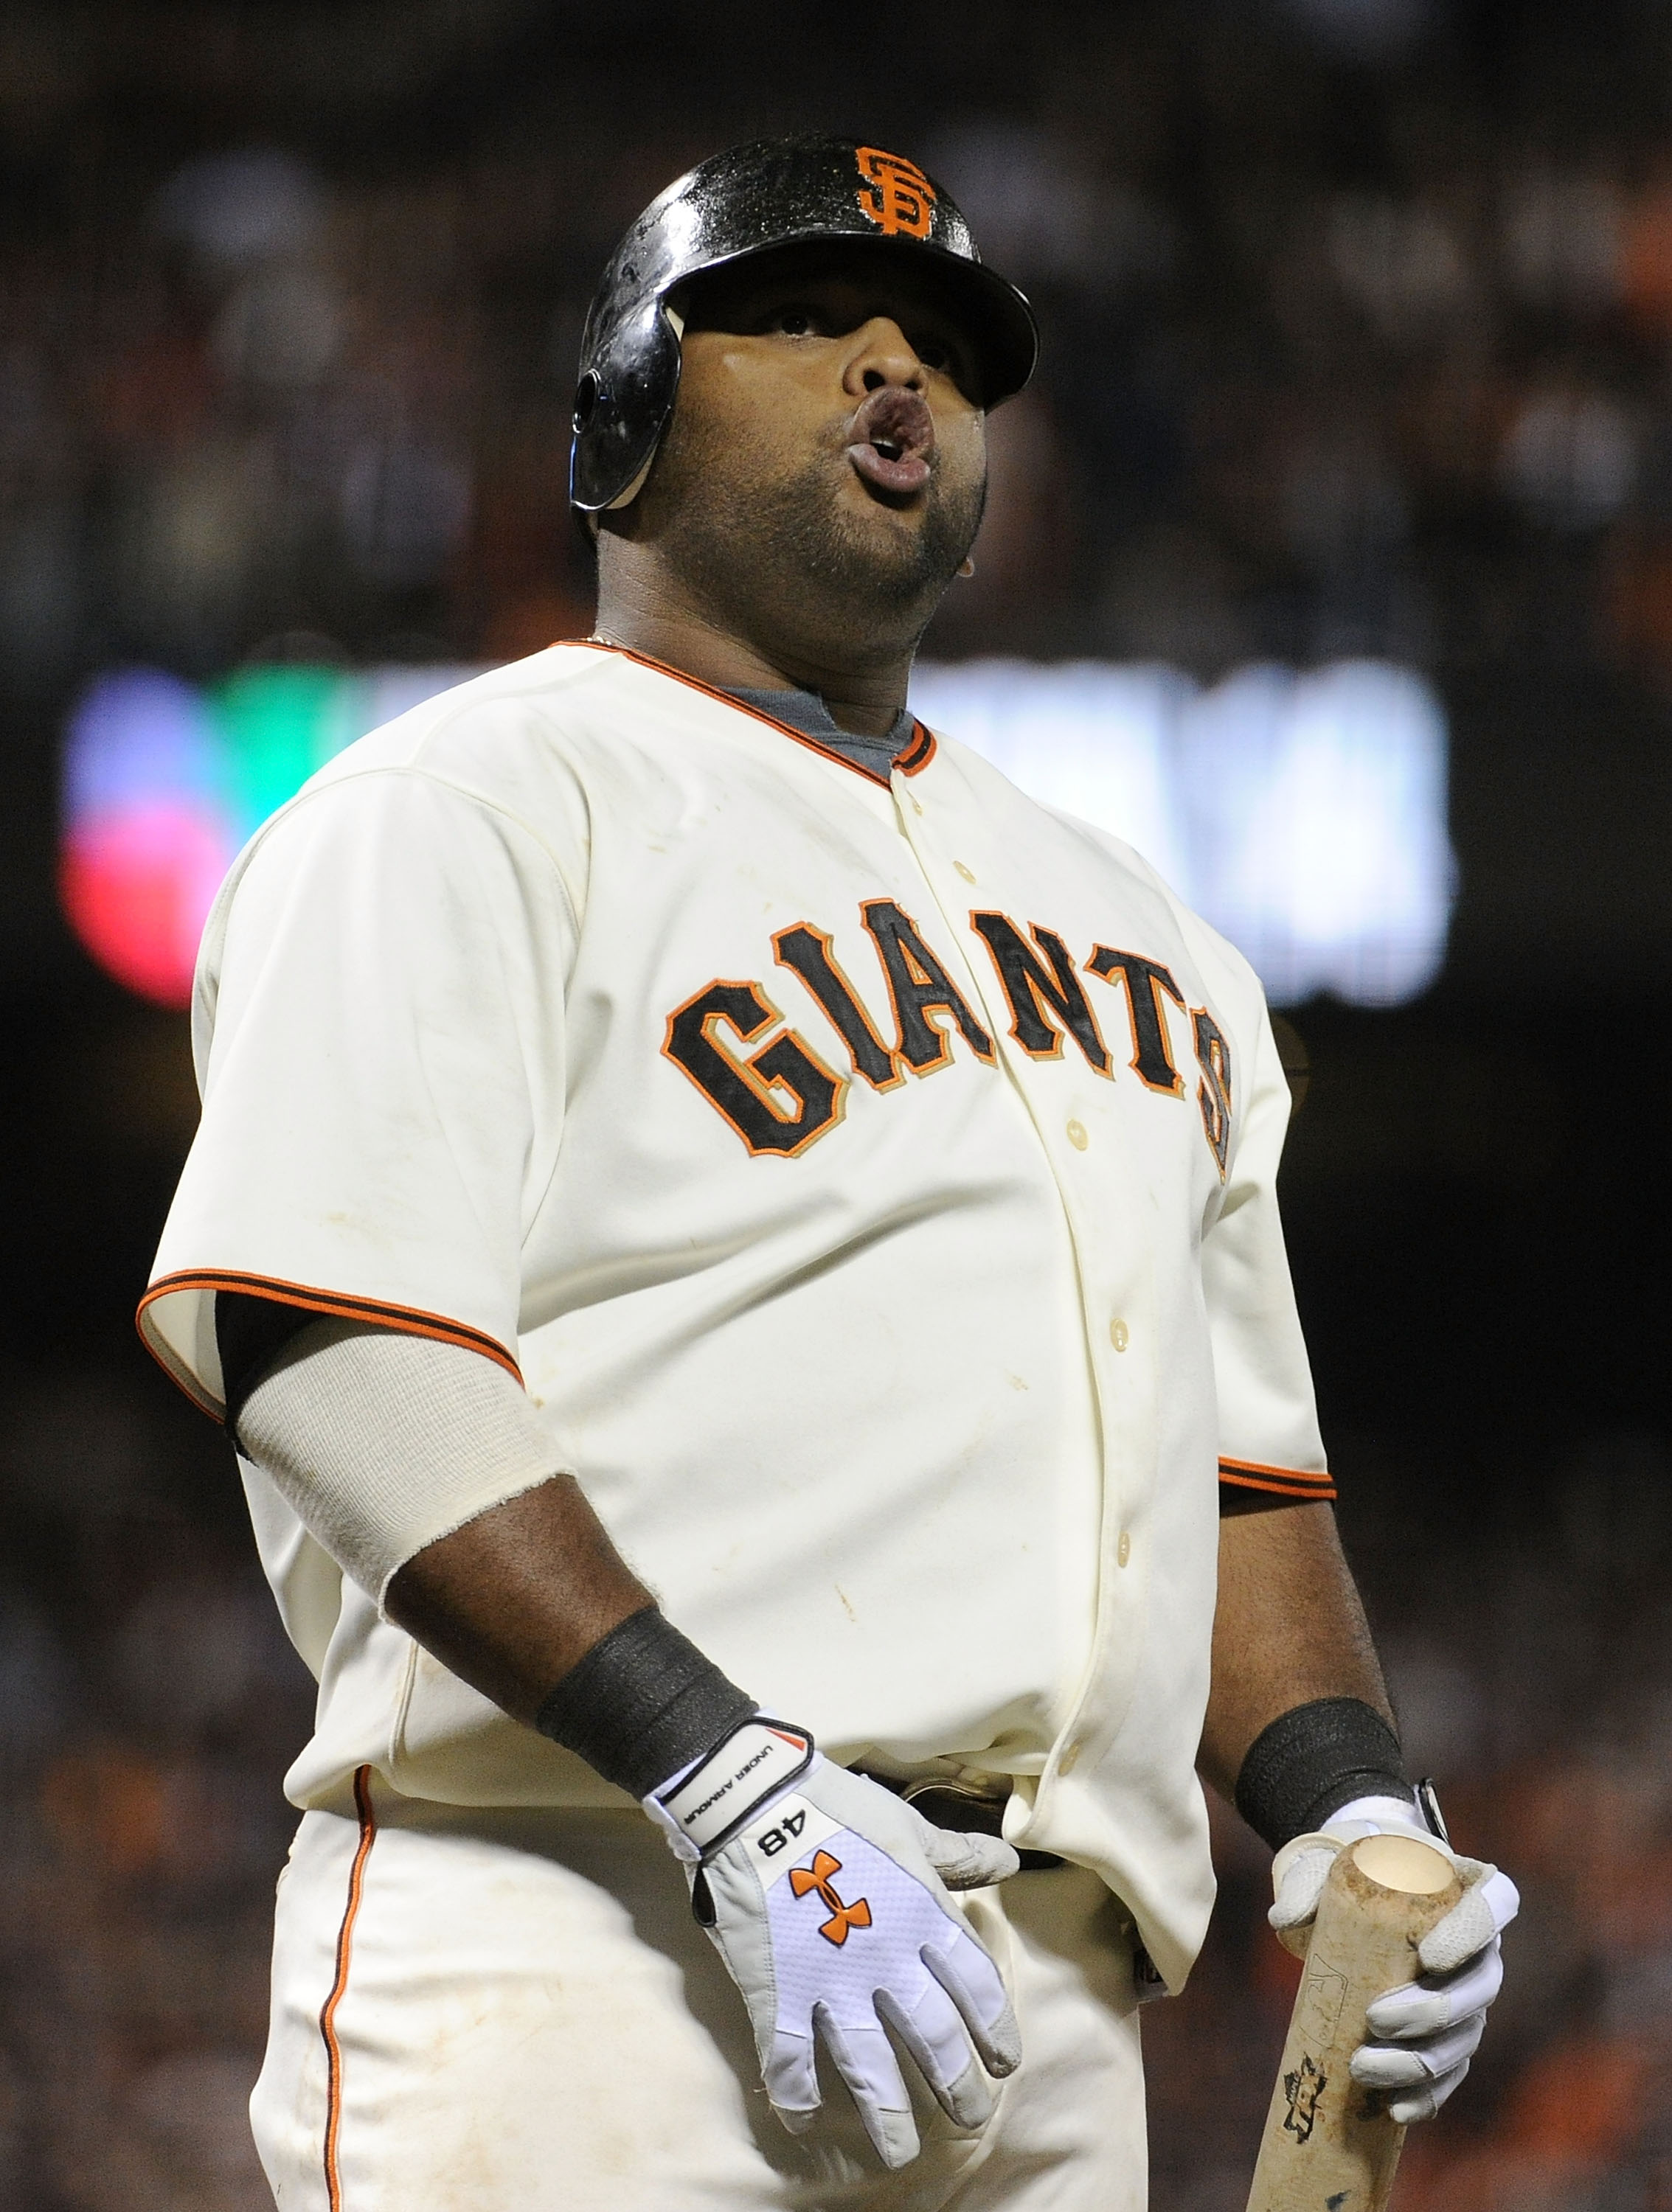 SAN FRANCISCO - OCTOBER 20:  Pablo Sandoval #48 of the San Francisco Giants reacts during an at-bat against the Philadelphia Phillies in Game Four of the NLCS during the 2010 MLB Playoffs at AT&T Park on October 20, 2010 in San Francisco, California.  (Ph